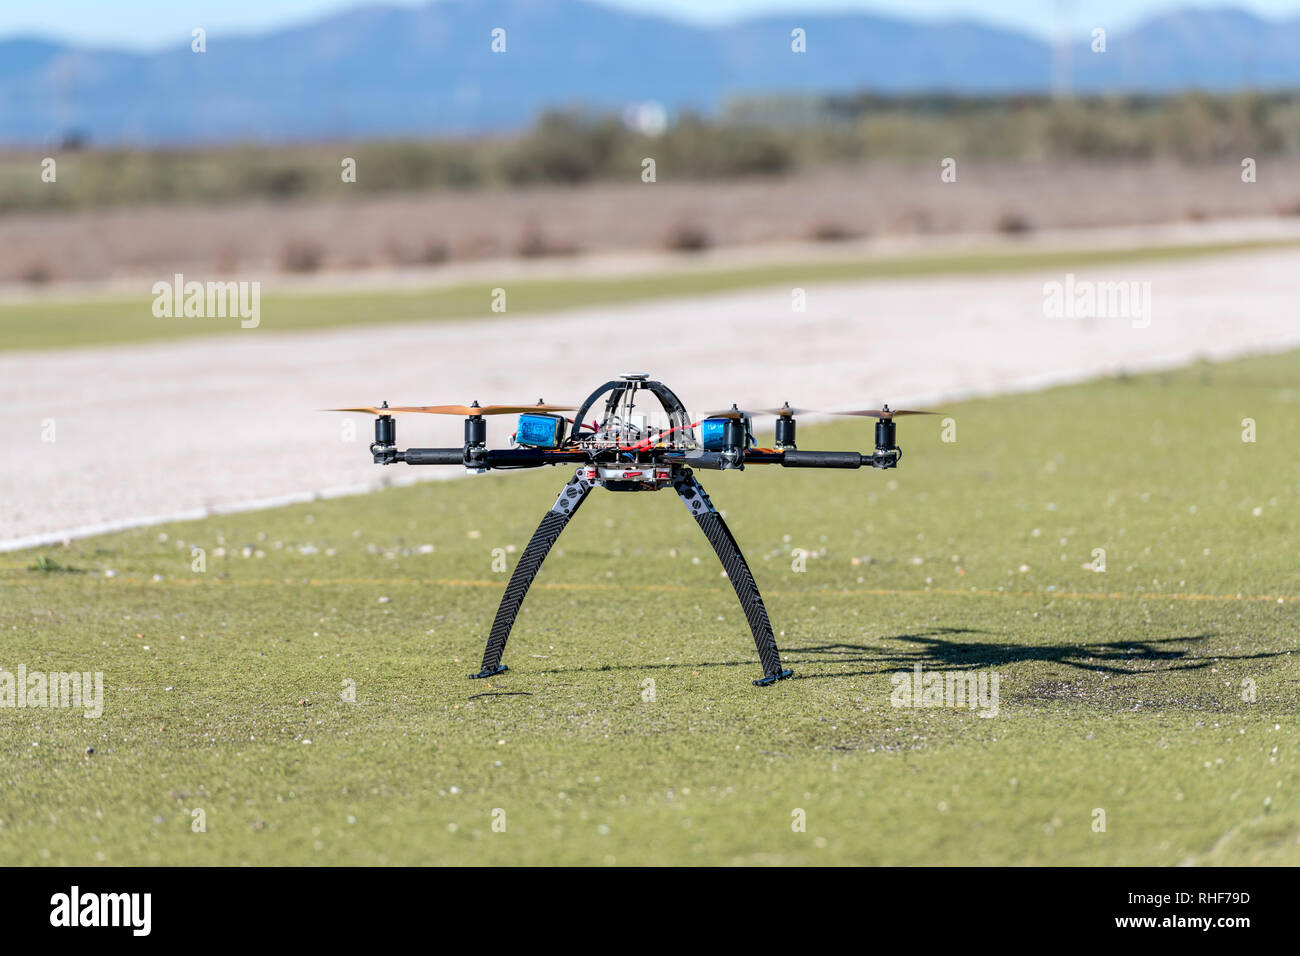 Professional drone before a flight in a test airfield Stock Photo